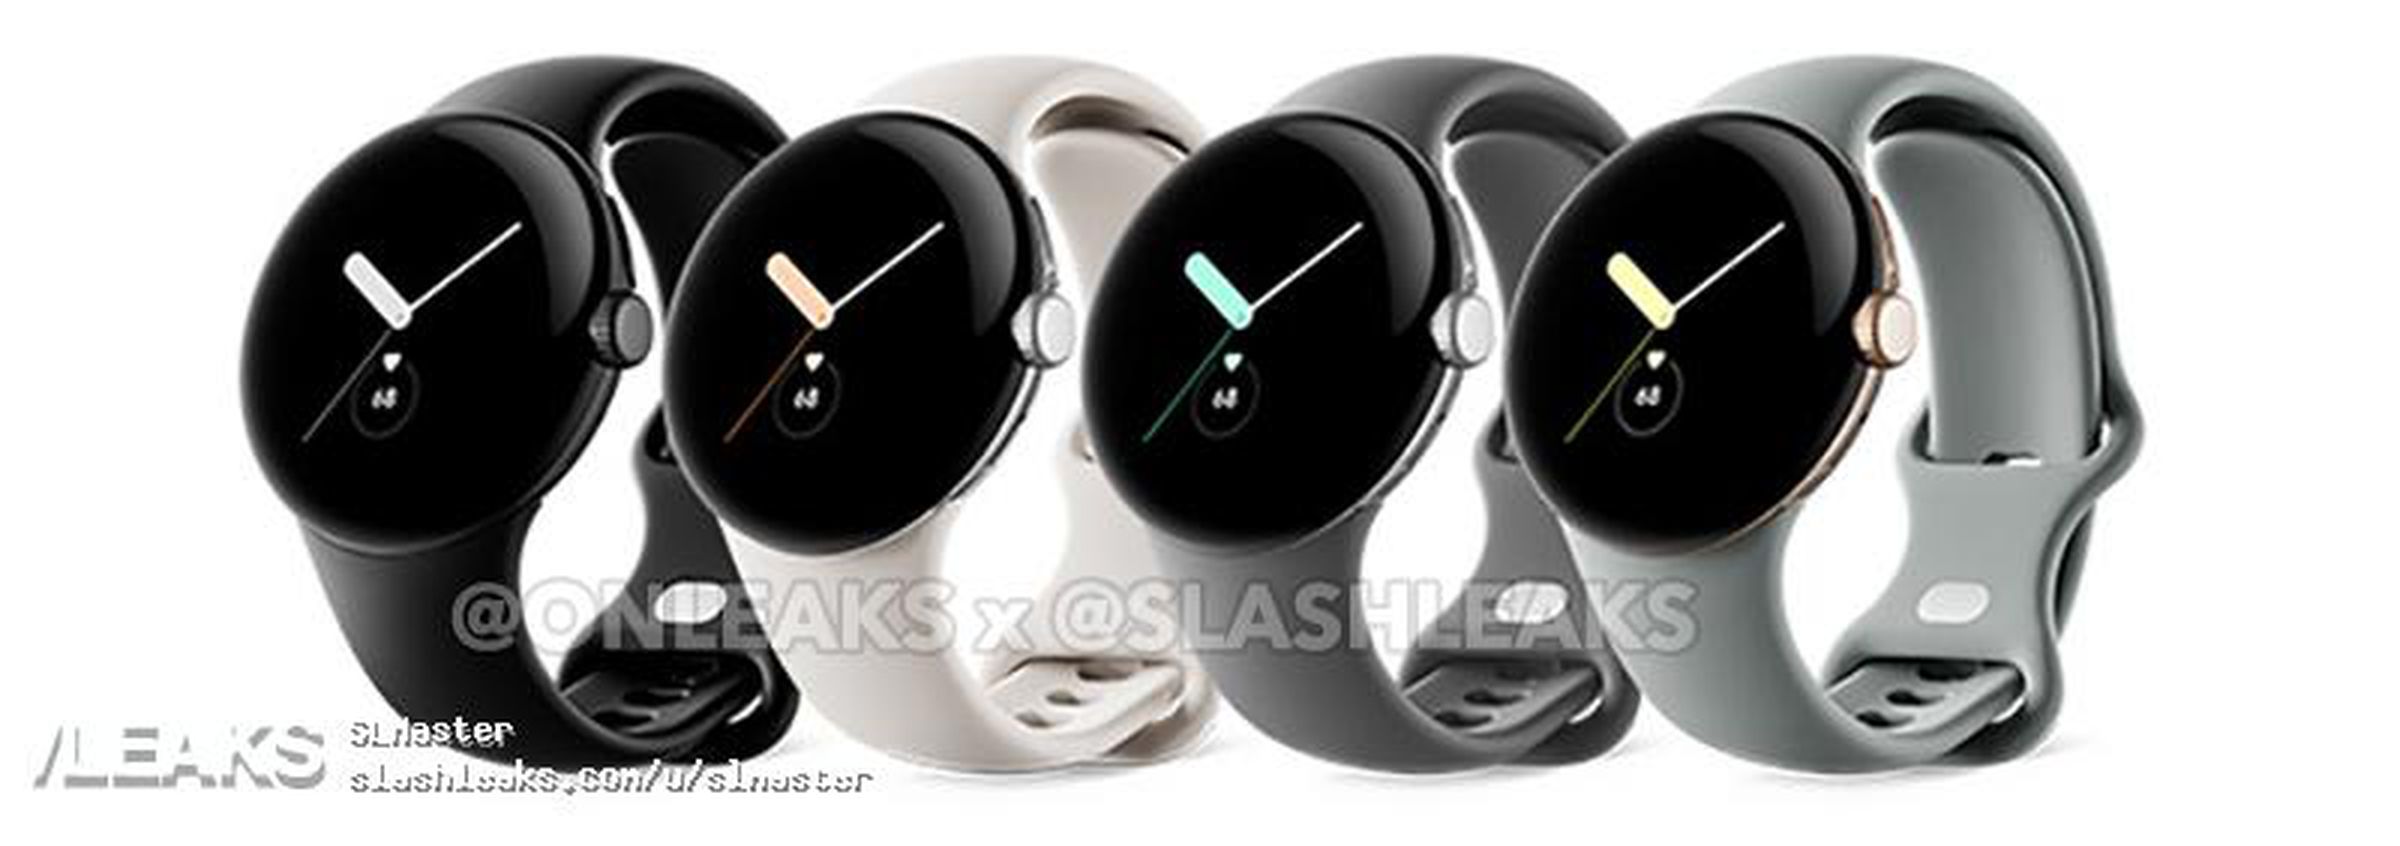 Four Pixel Watches with silicone bands